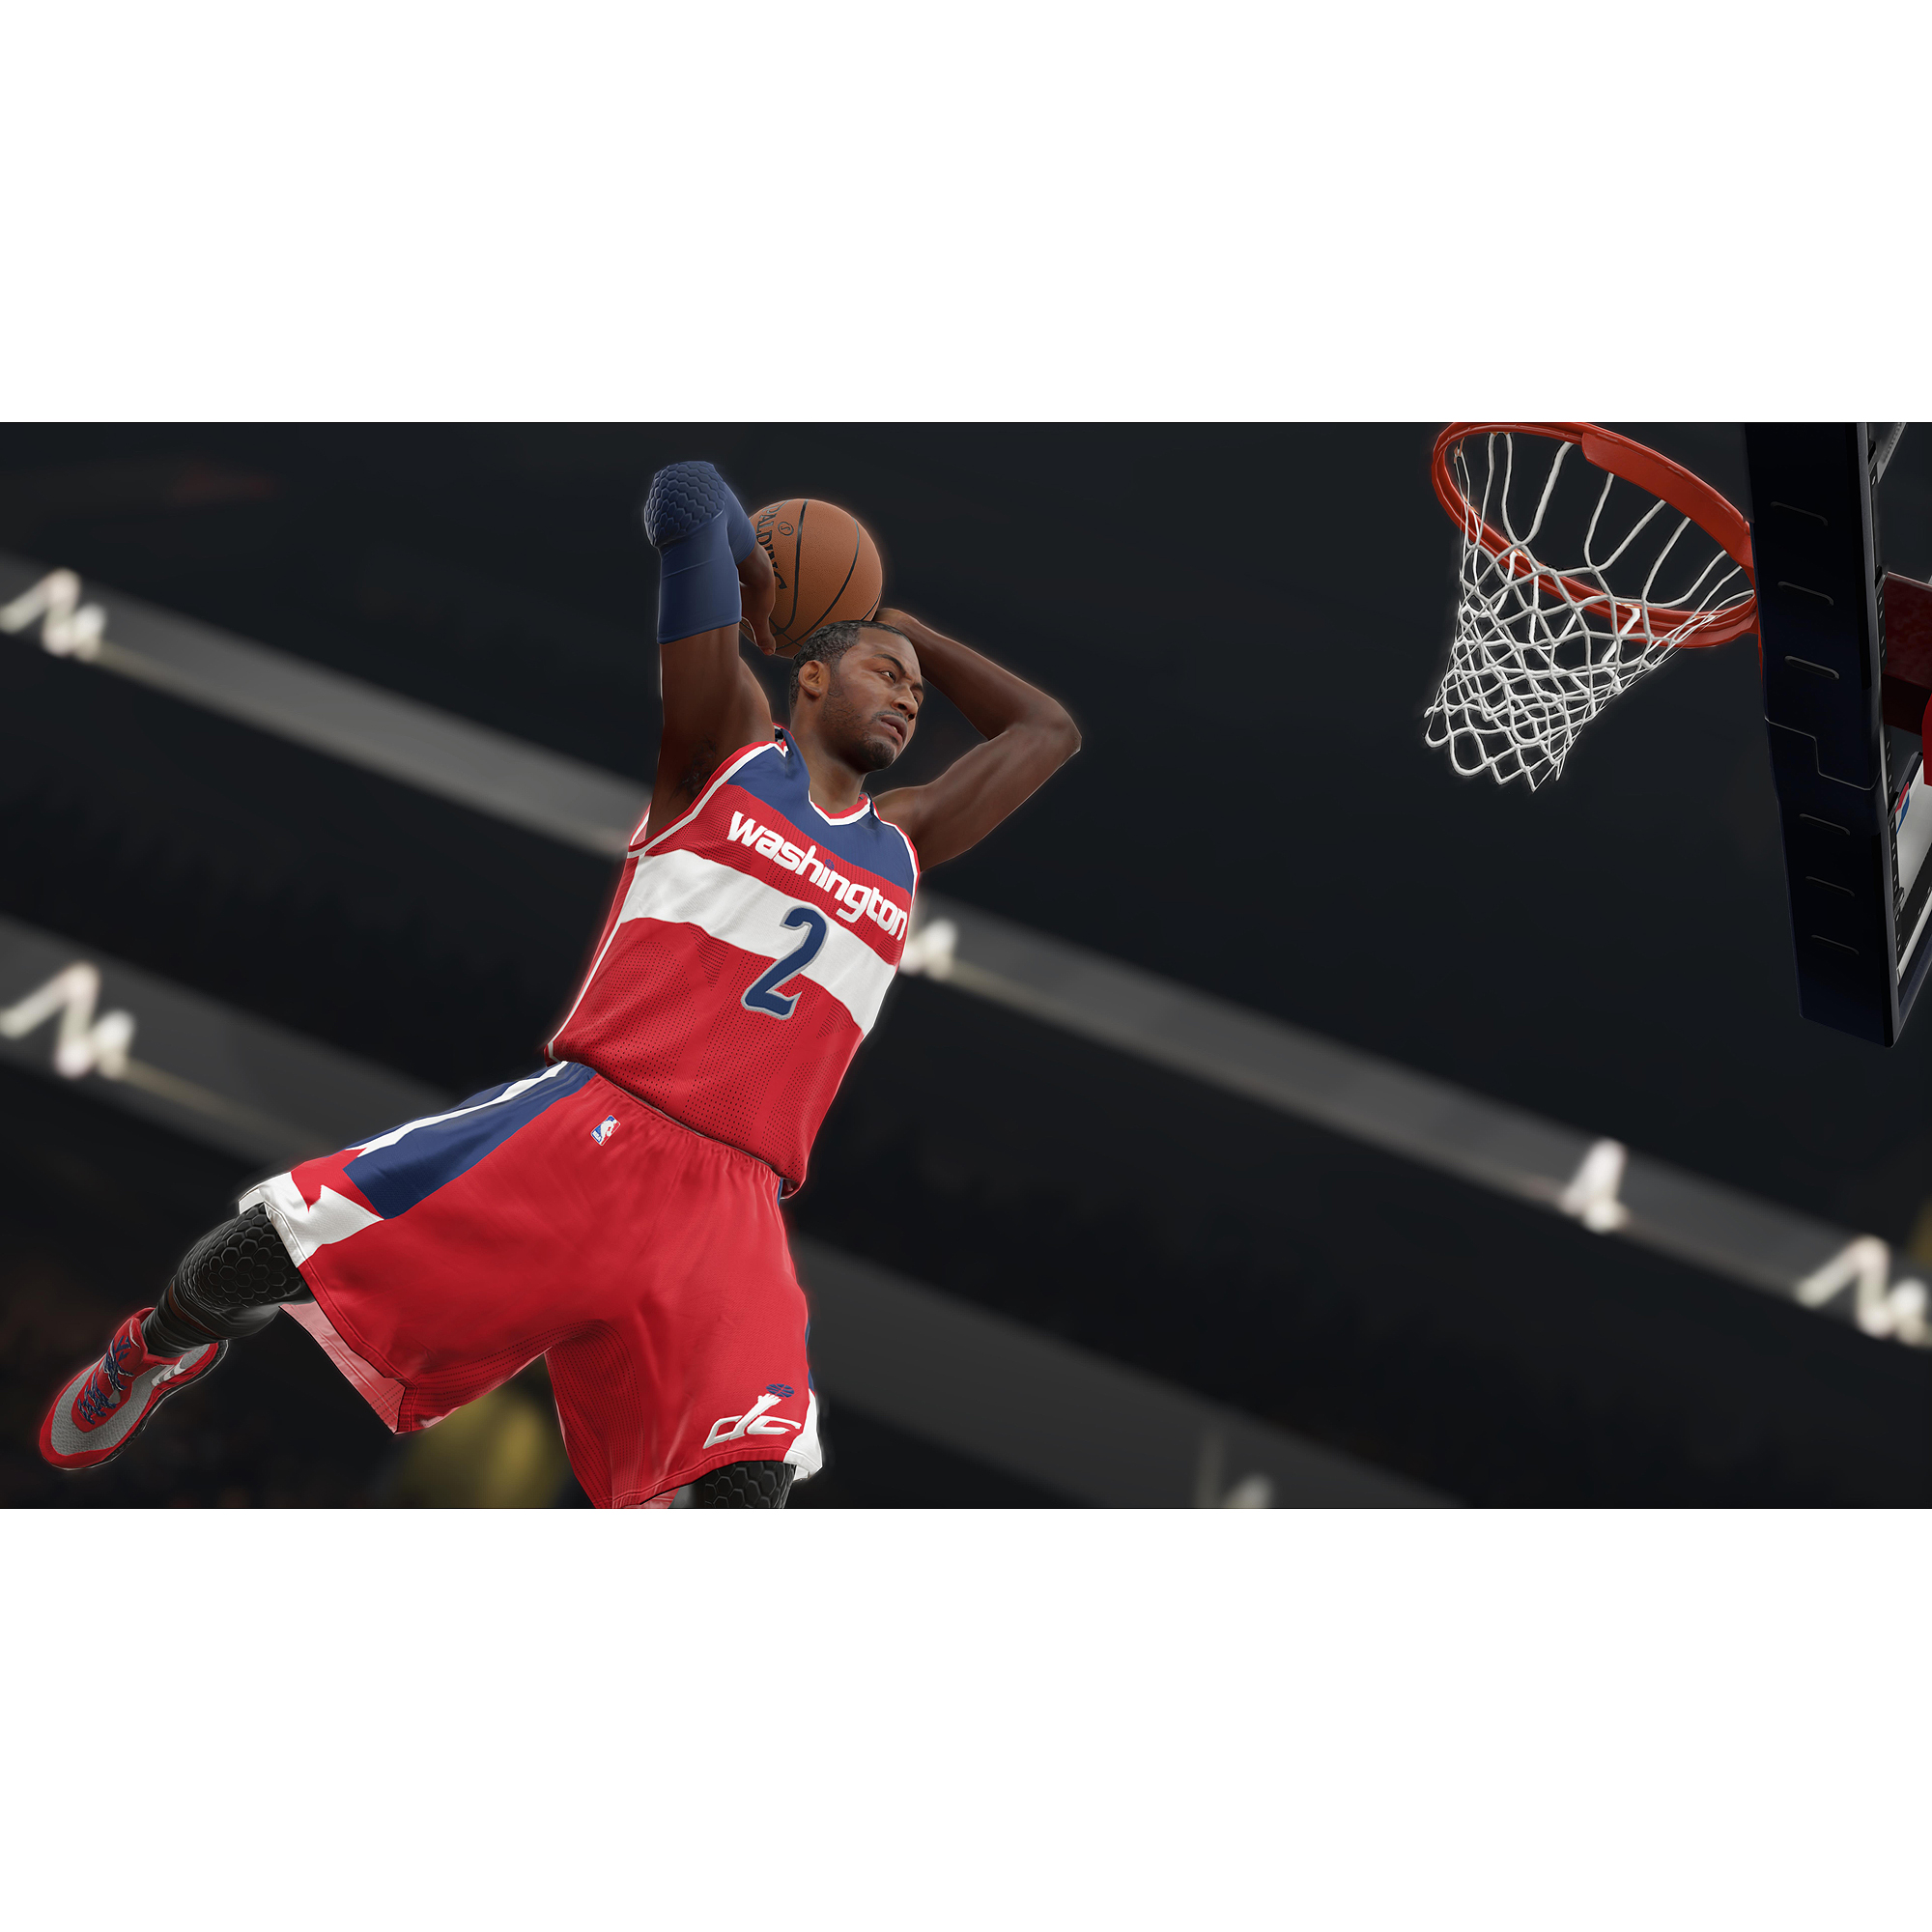 NBA 2K15 for Xbox One - image 2 of 7